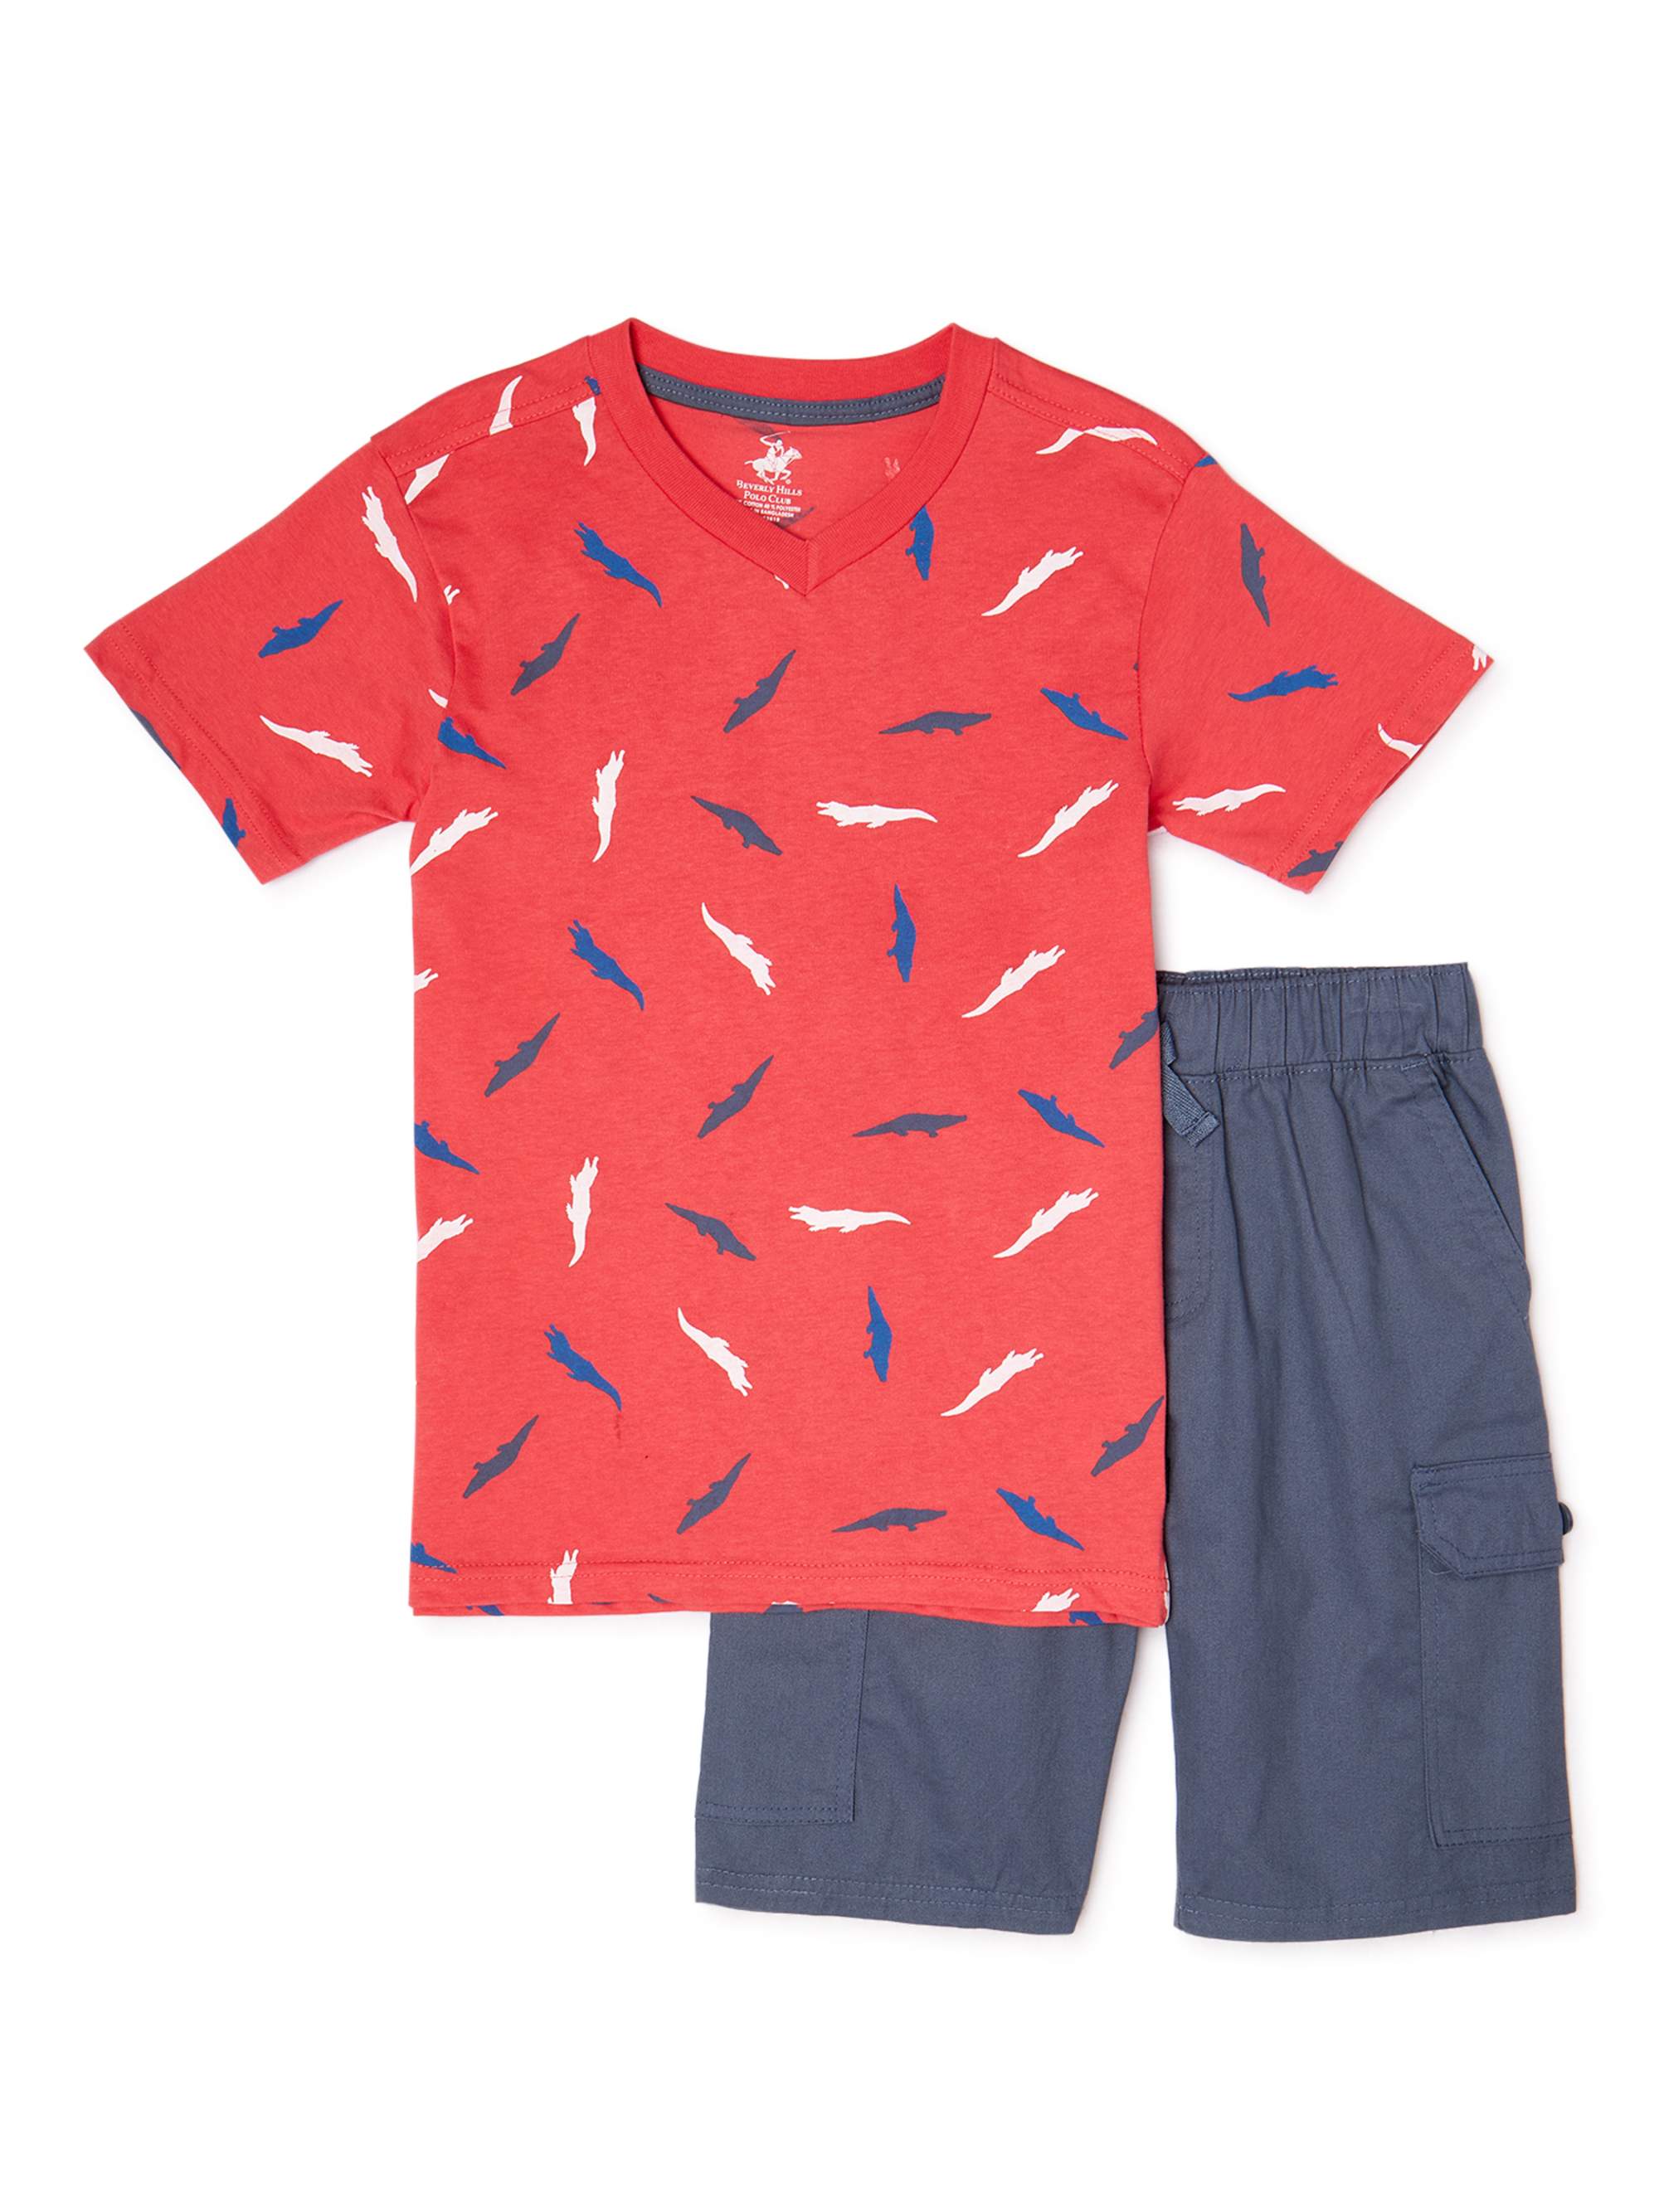 Beverly Hills Polo Club Boys 4-12 Short Sleeve T-Shirt & Cargo Shorts, 2-Piece Outfit Set - image 1 of 3